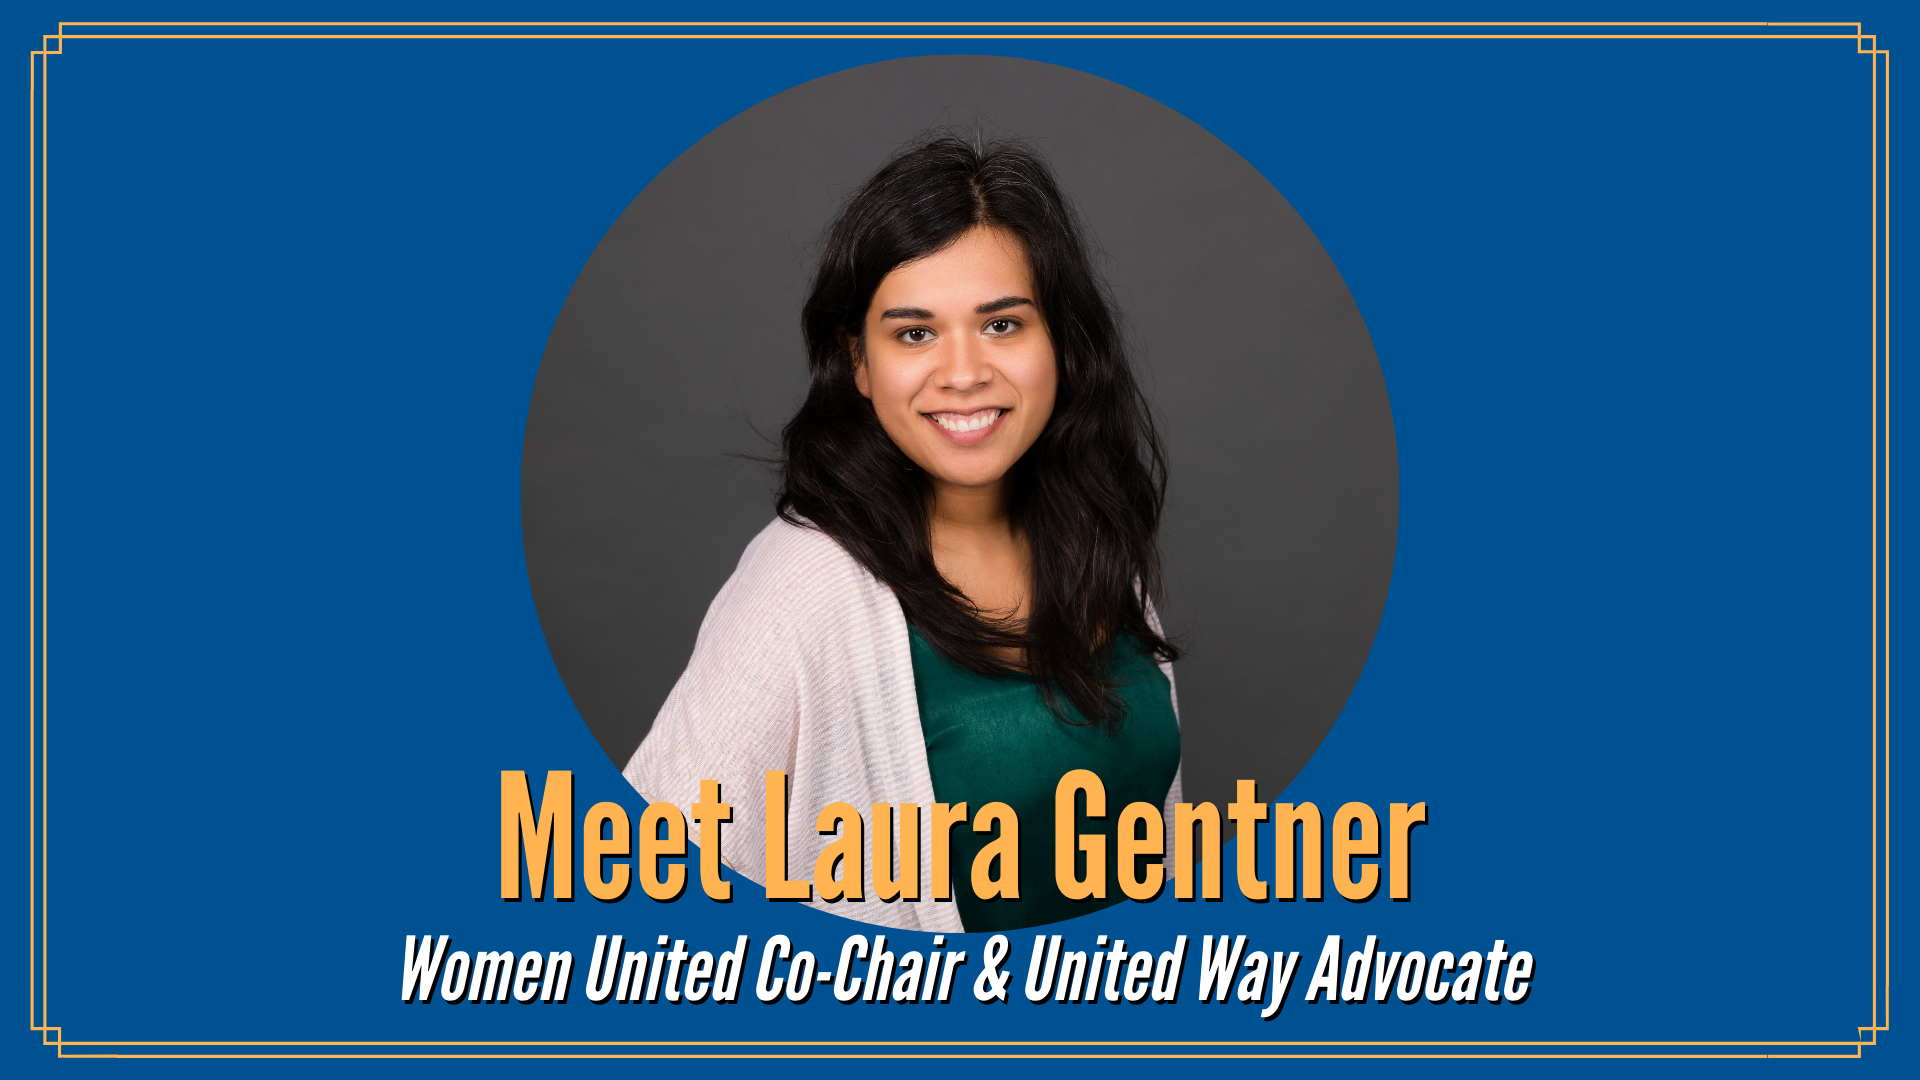 Meet Laura Gentner: Living life with kindness, honesty, and support for the dignity of everyone